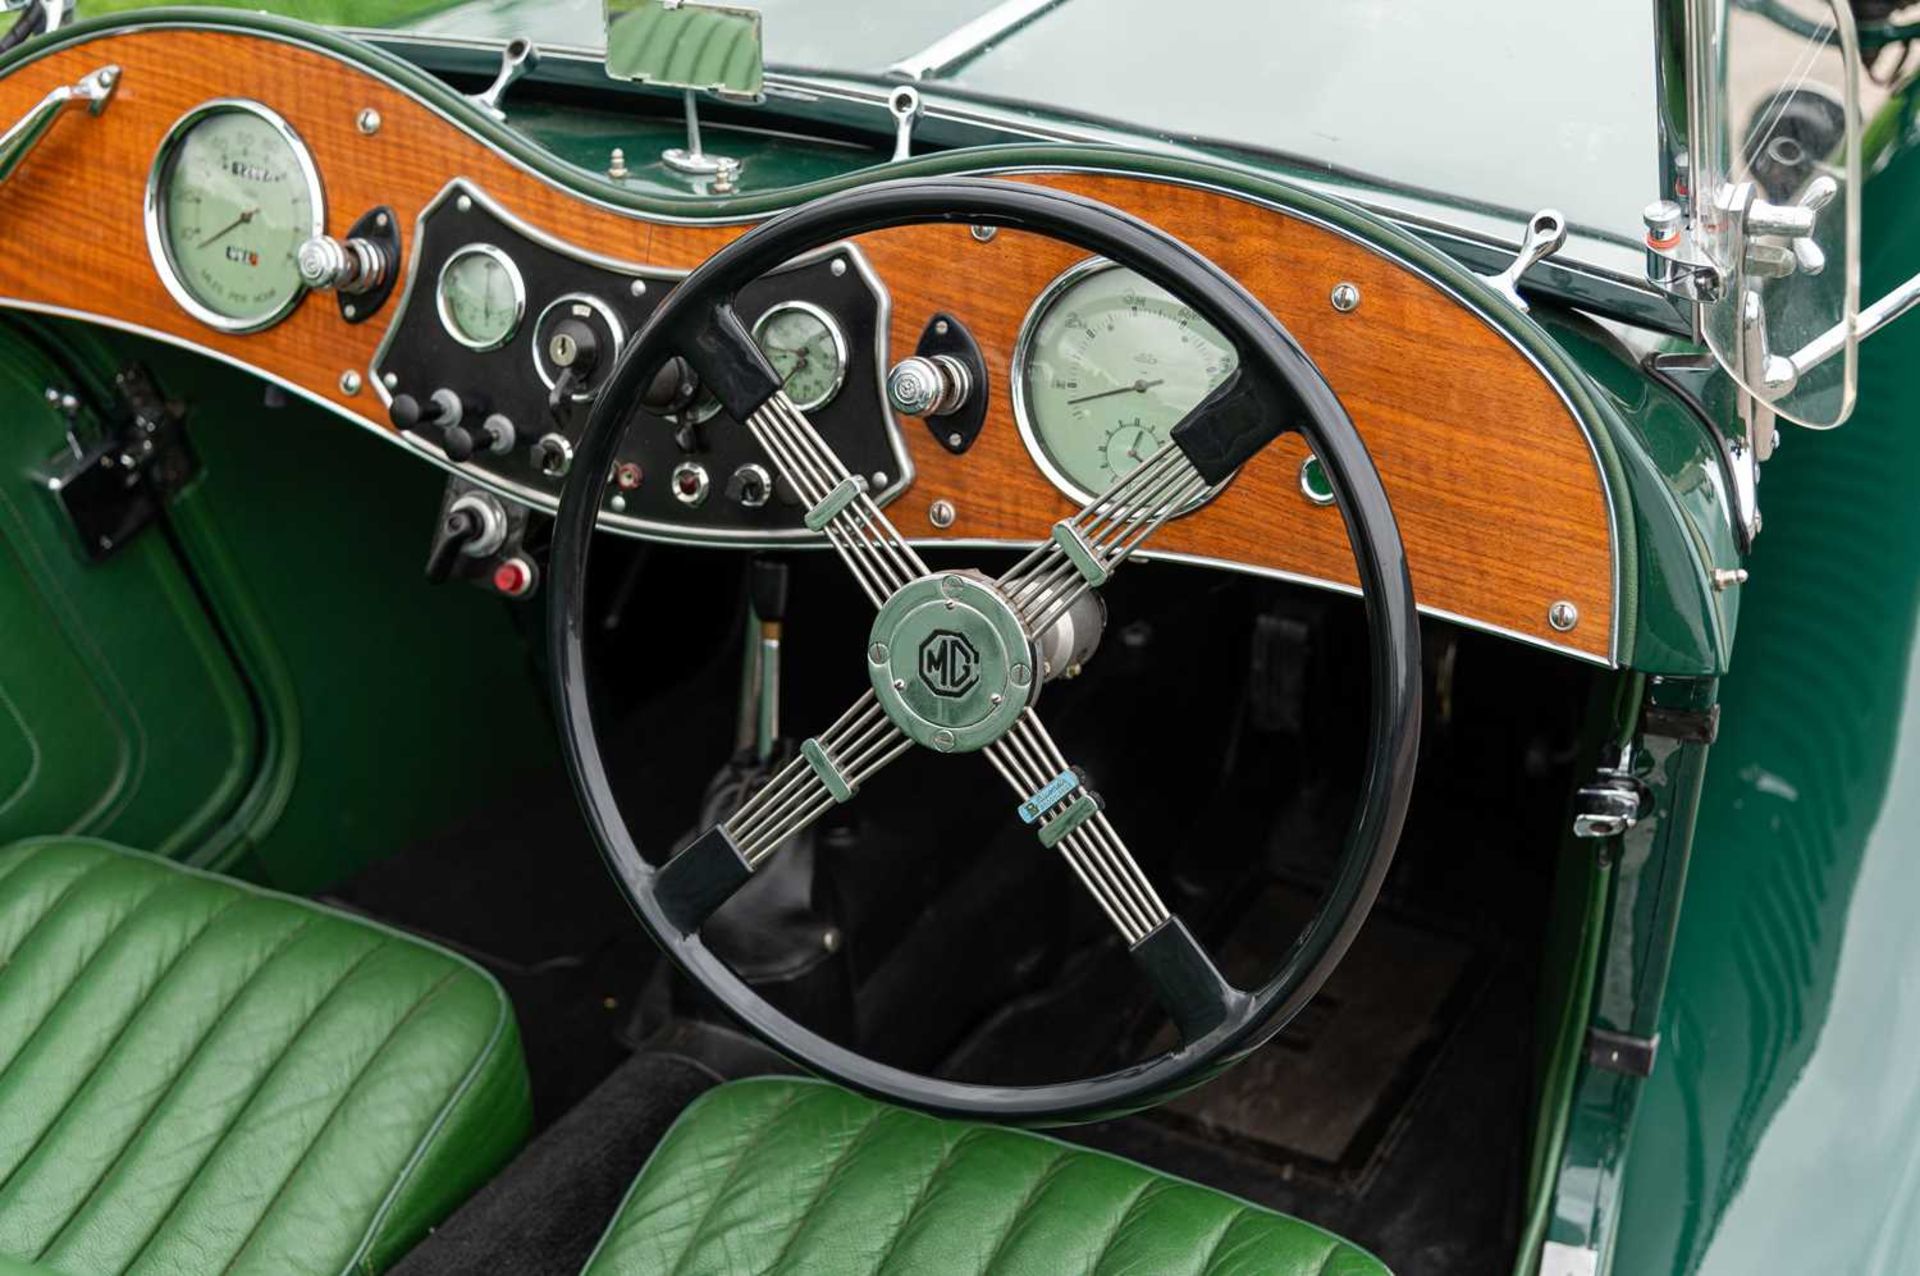 1947 MG TC Midget  Fully restored, right-hand-drive UK home market example - Image 53 of 76